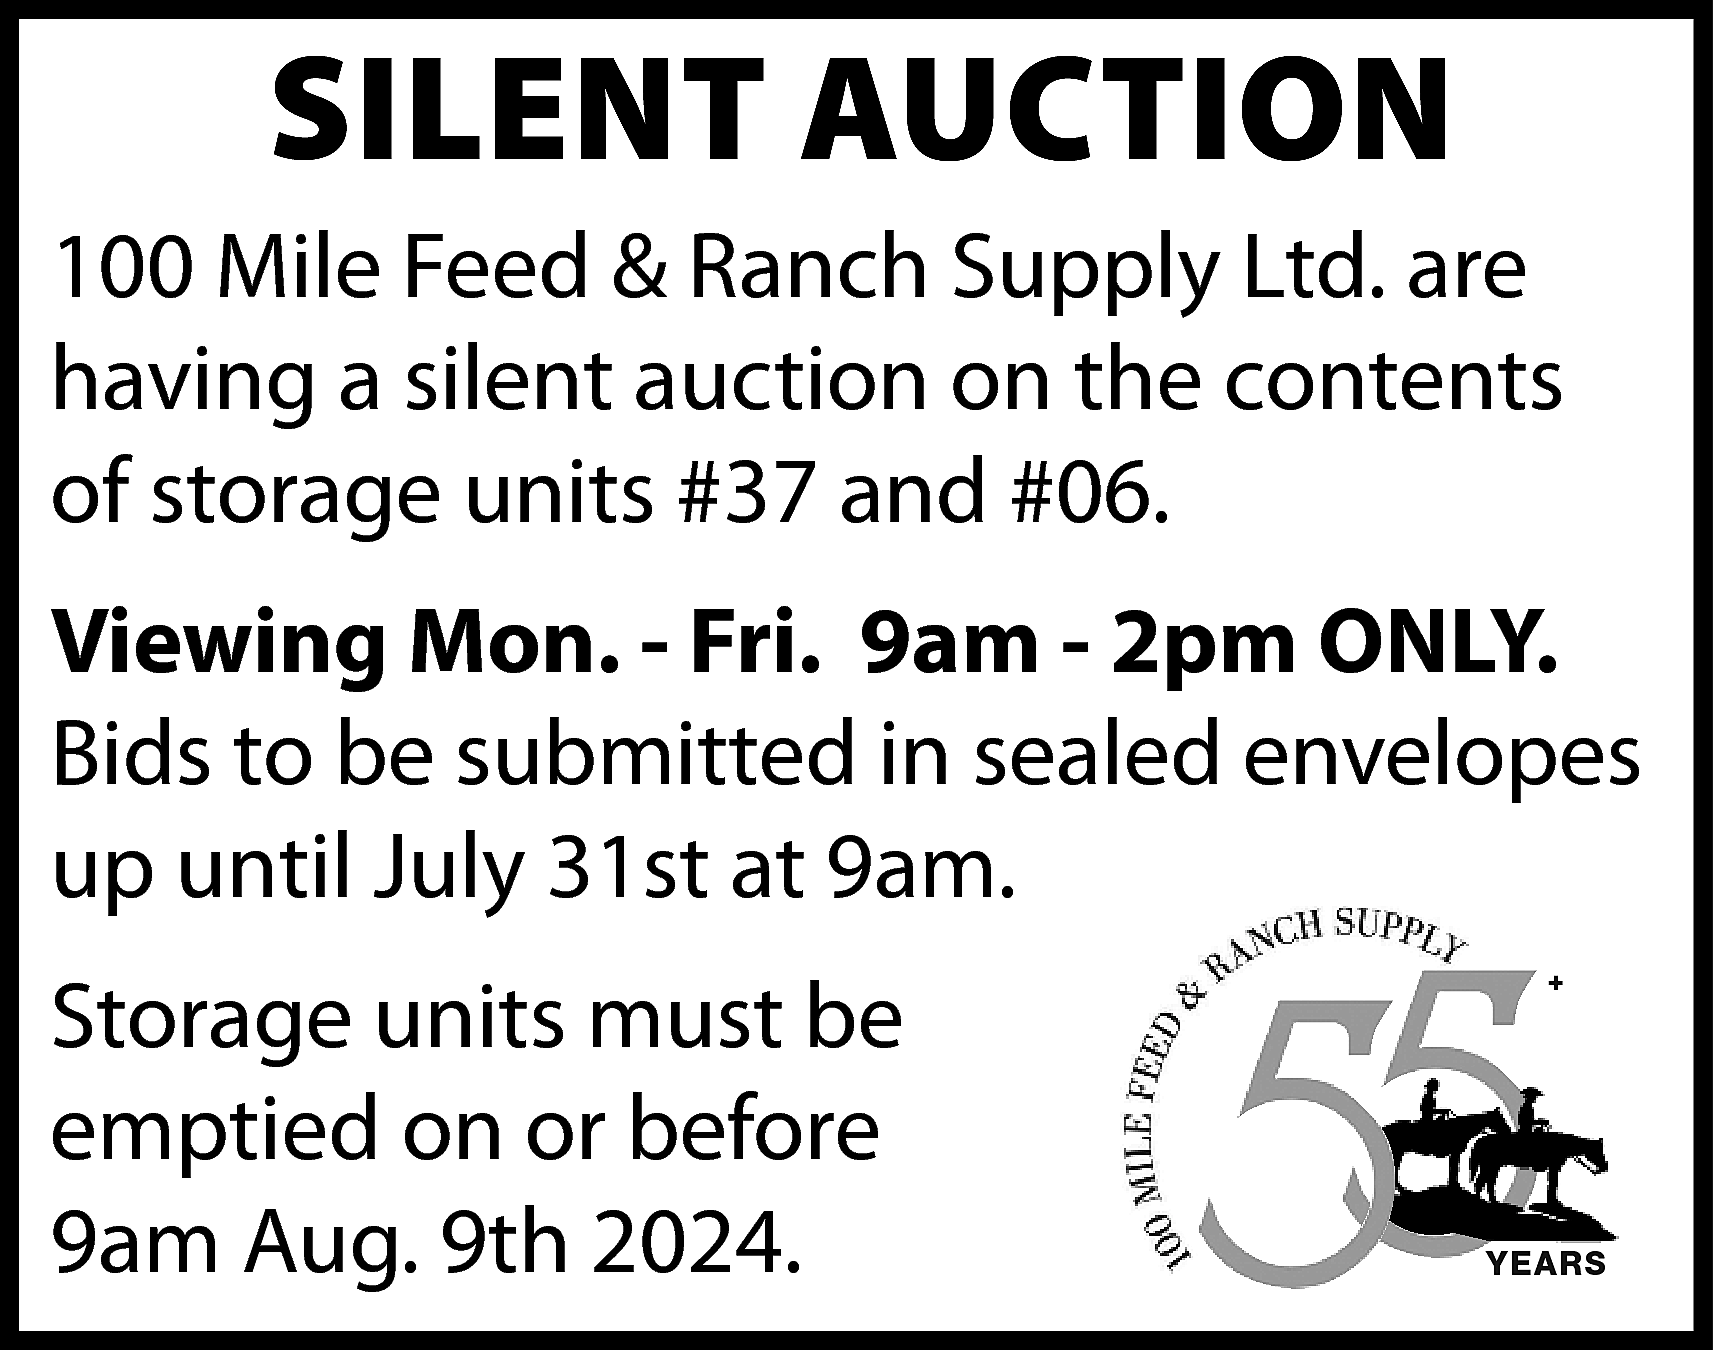 SILENT AUCTION <br> <br>100 Mile  SILENT AUCTION    100 Mile Feed & Ranch Supply Ltd. are  having a silent auction on the contents  of storage units #37 and #06.  Viewing Mon. - Fri. 9am - 2pm ONLY.  Bids to be submitted in sealed envelopes  up until July 31st at 9am.  Storage units must be  emptied on or before  9am Aug. 9th 2024.    +    YEARS    